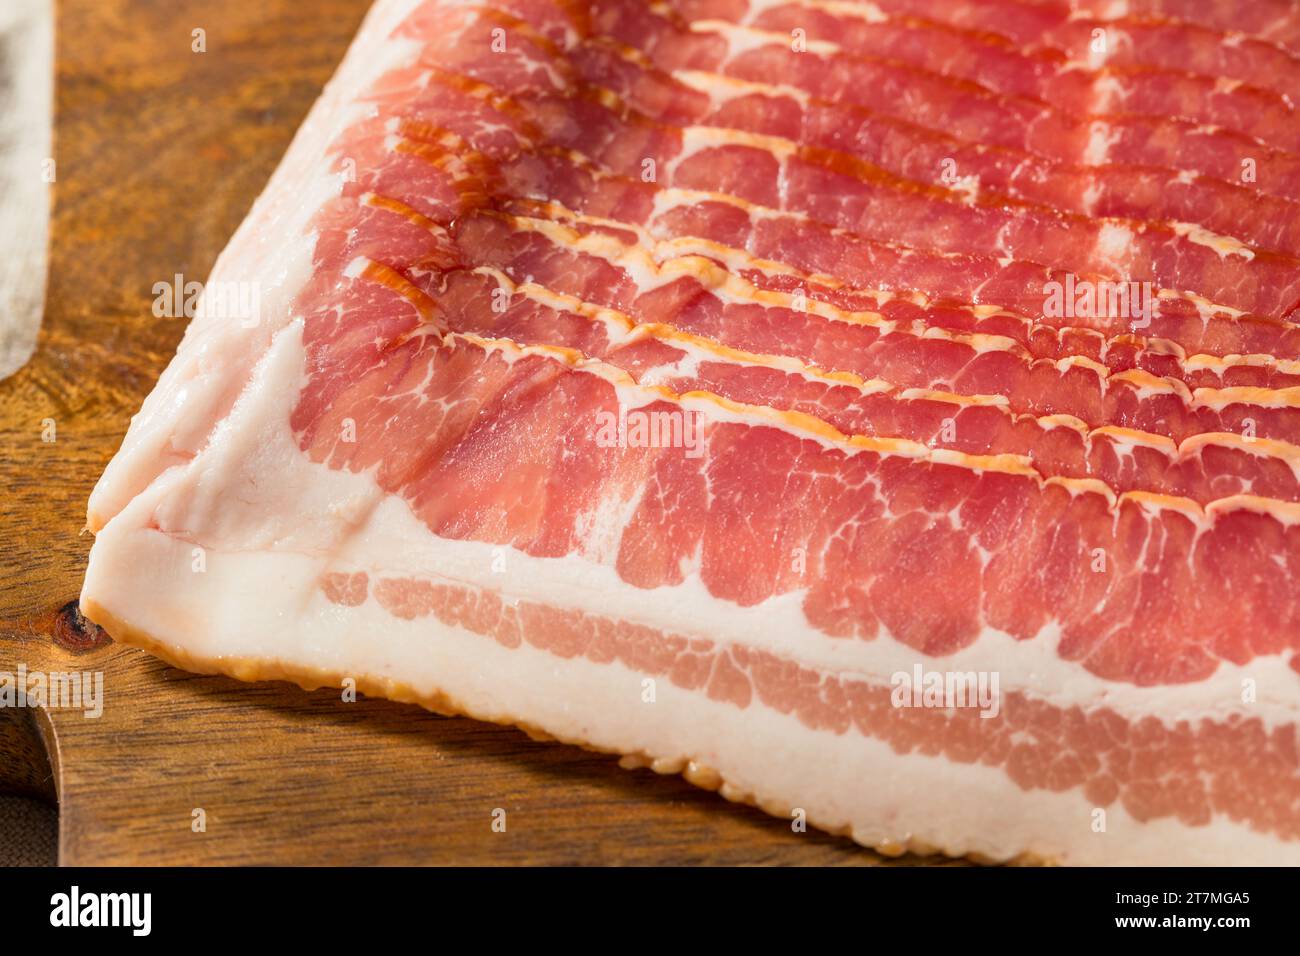 Red Organic Raw Bacon Cut into Slices Foto Stock